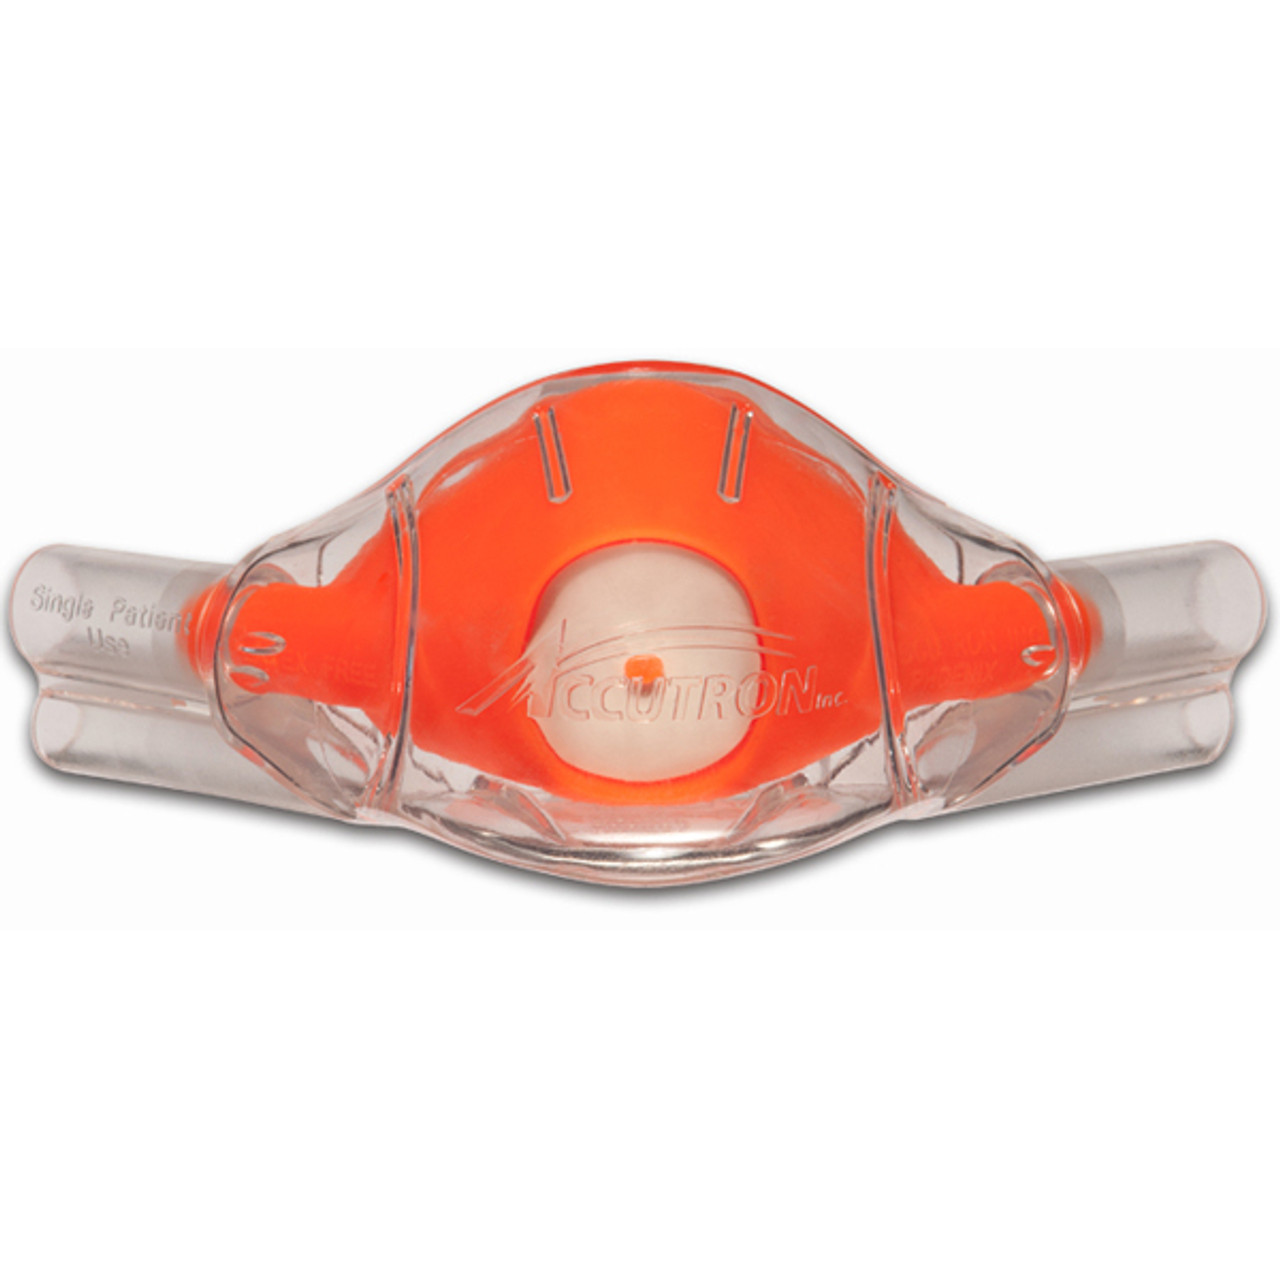 Crosstex Accutron Clearview Nasal Masks Large Adult, Outlaw Orange, Single-Use, 12/pk